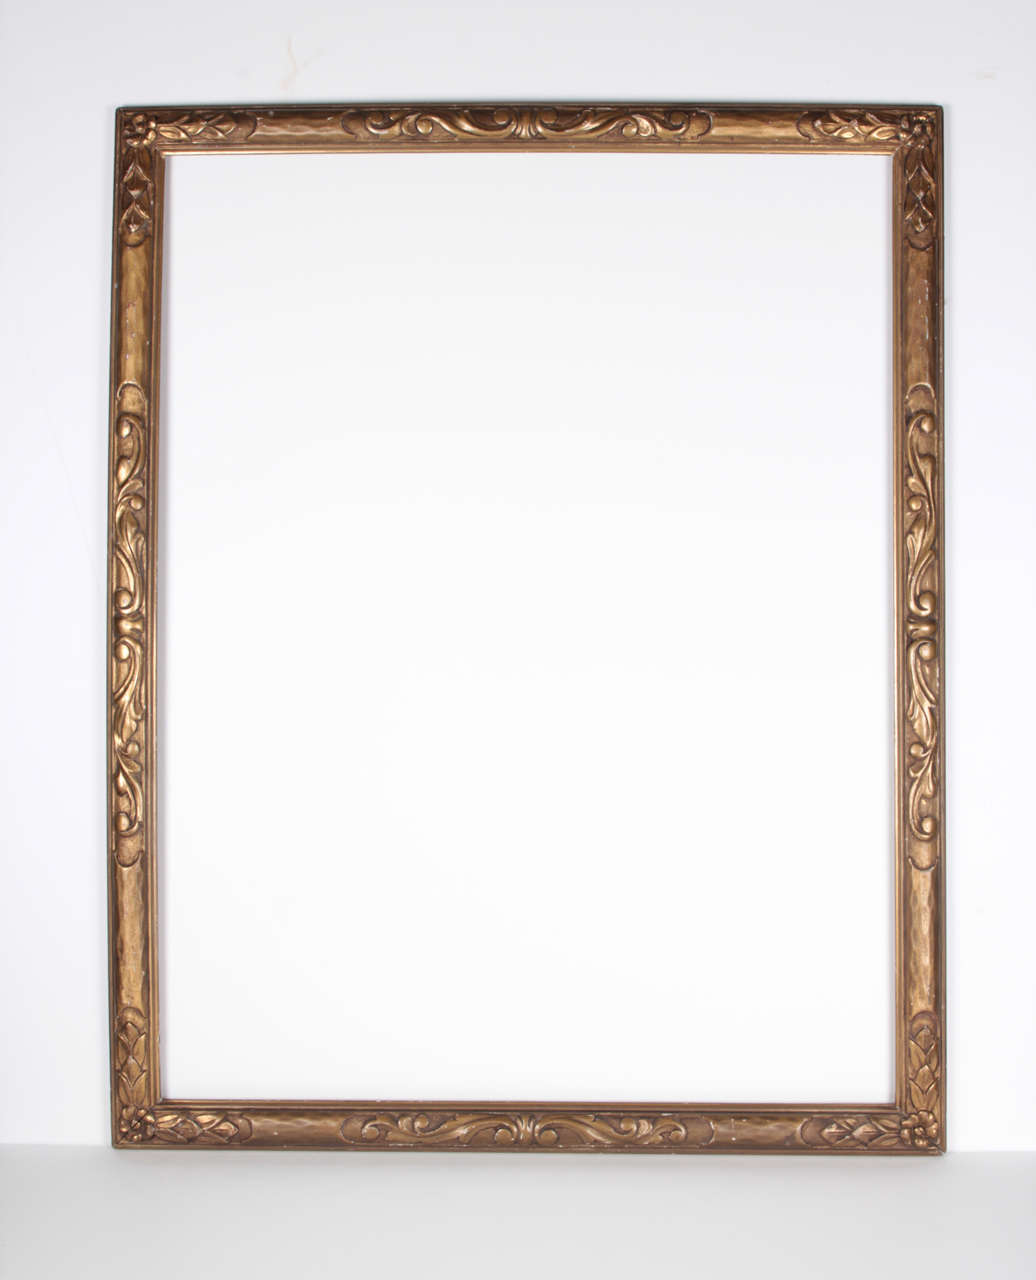 Early 20th century Arts & Crafts period frame, Foster Bros., Boston, print/watercolor frame, Roman gilded, hand carved with floral corner motif and central scroll and leaf decoration

Rabbet: 28 3/4 x 22 1/4 inches

Custom flat or beveled mirror